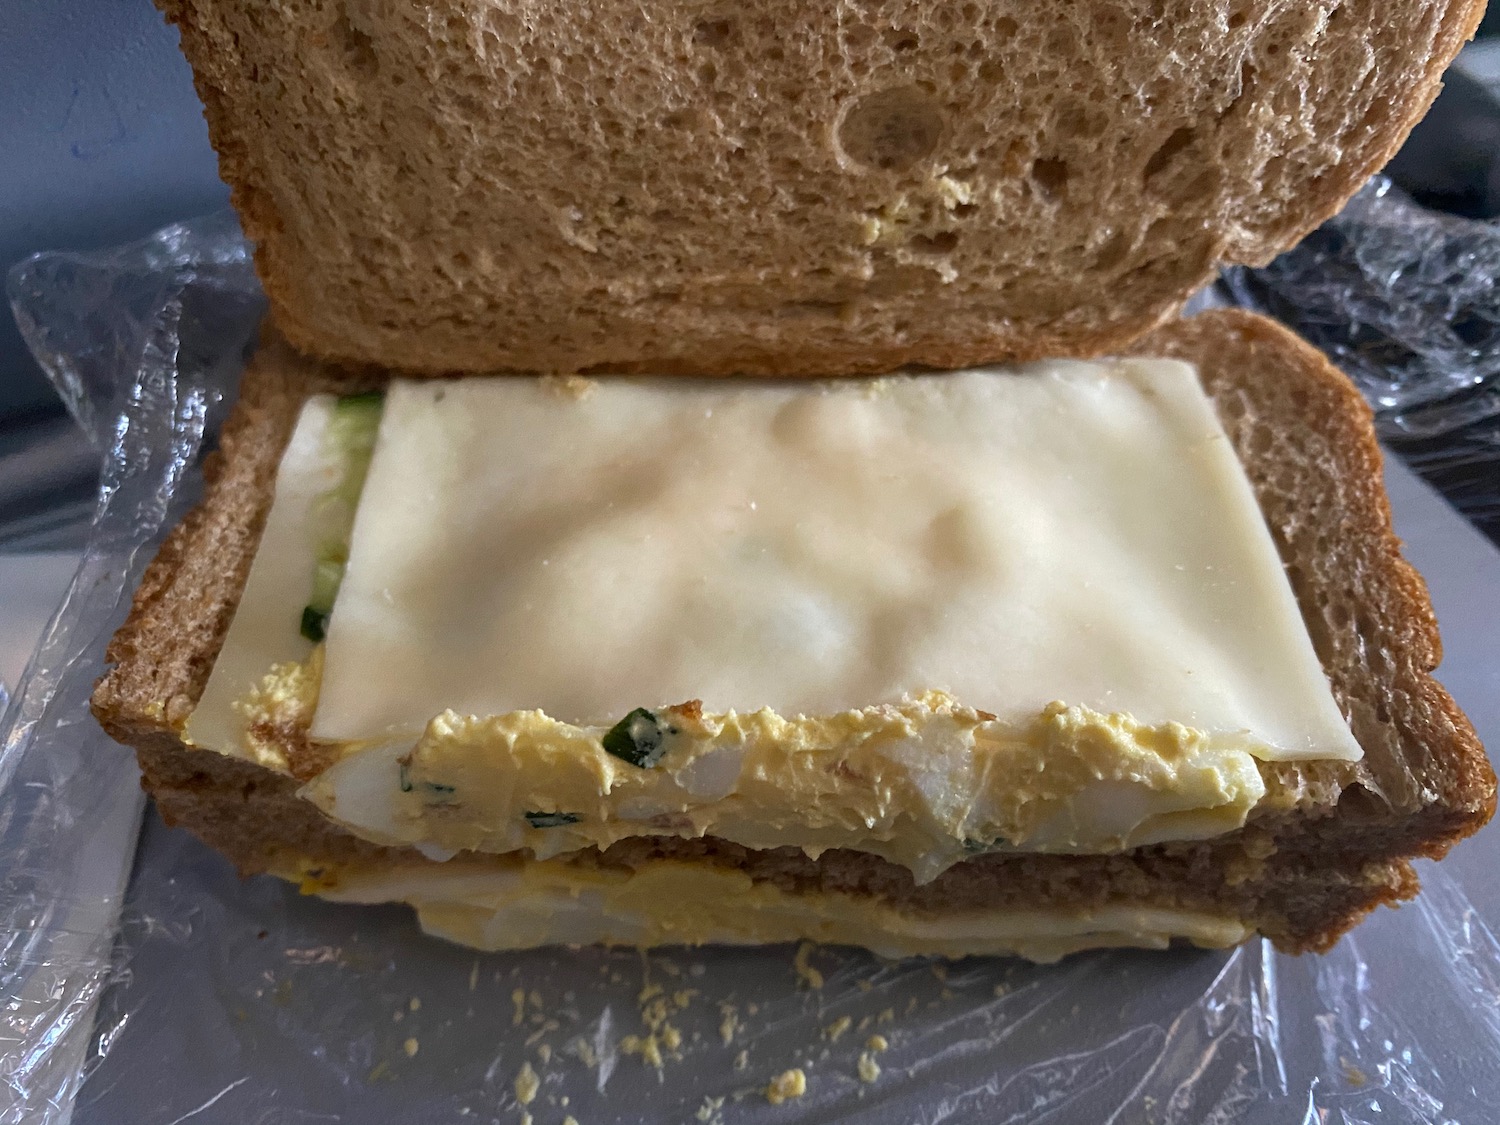 a sandwich with egg and cheese inside